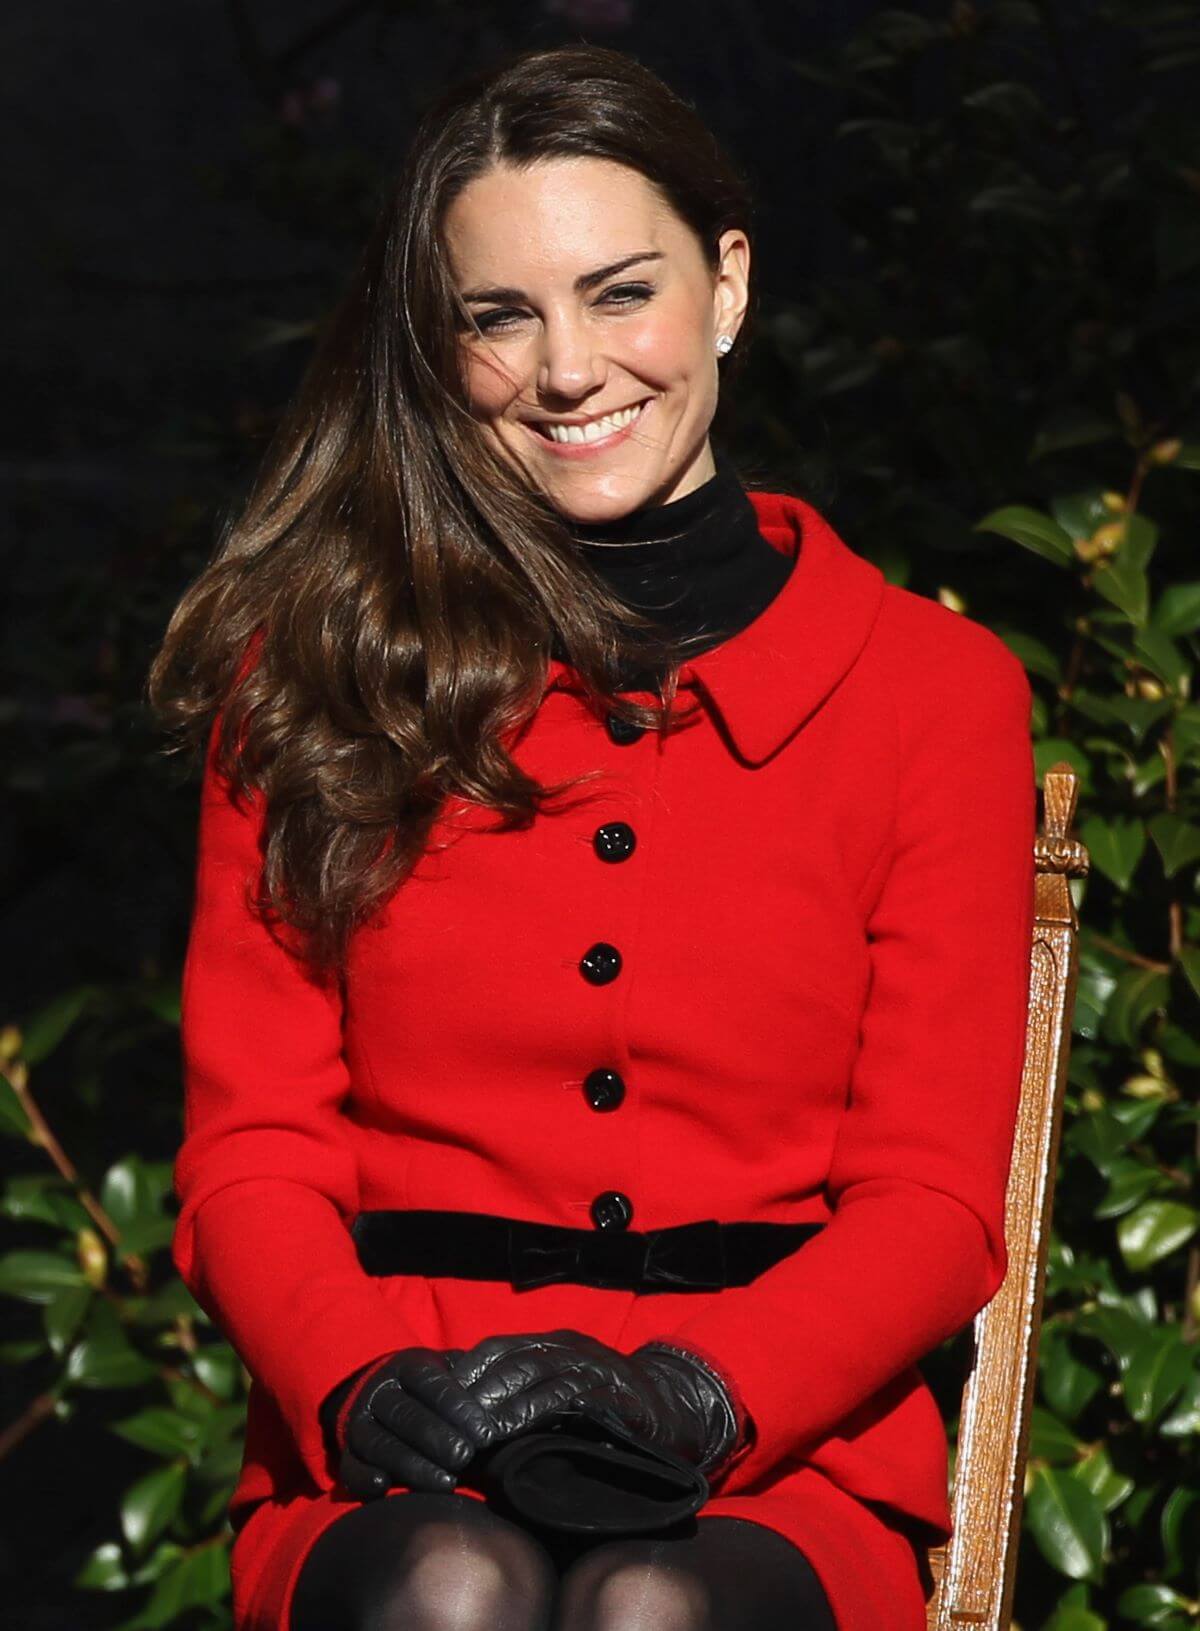 Kate Middleton returns to the University of St. Andrews to launch a fundraising campaign